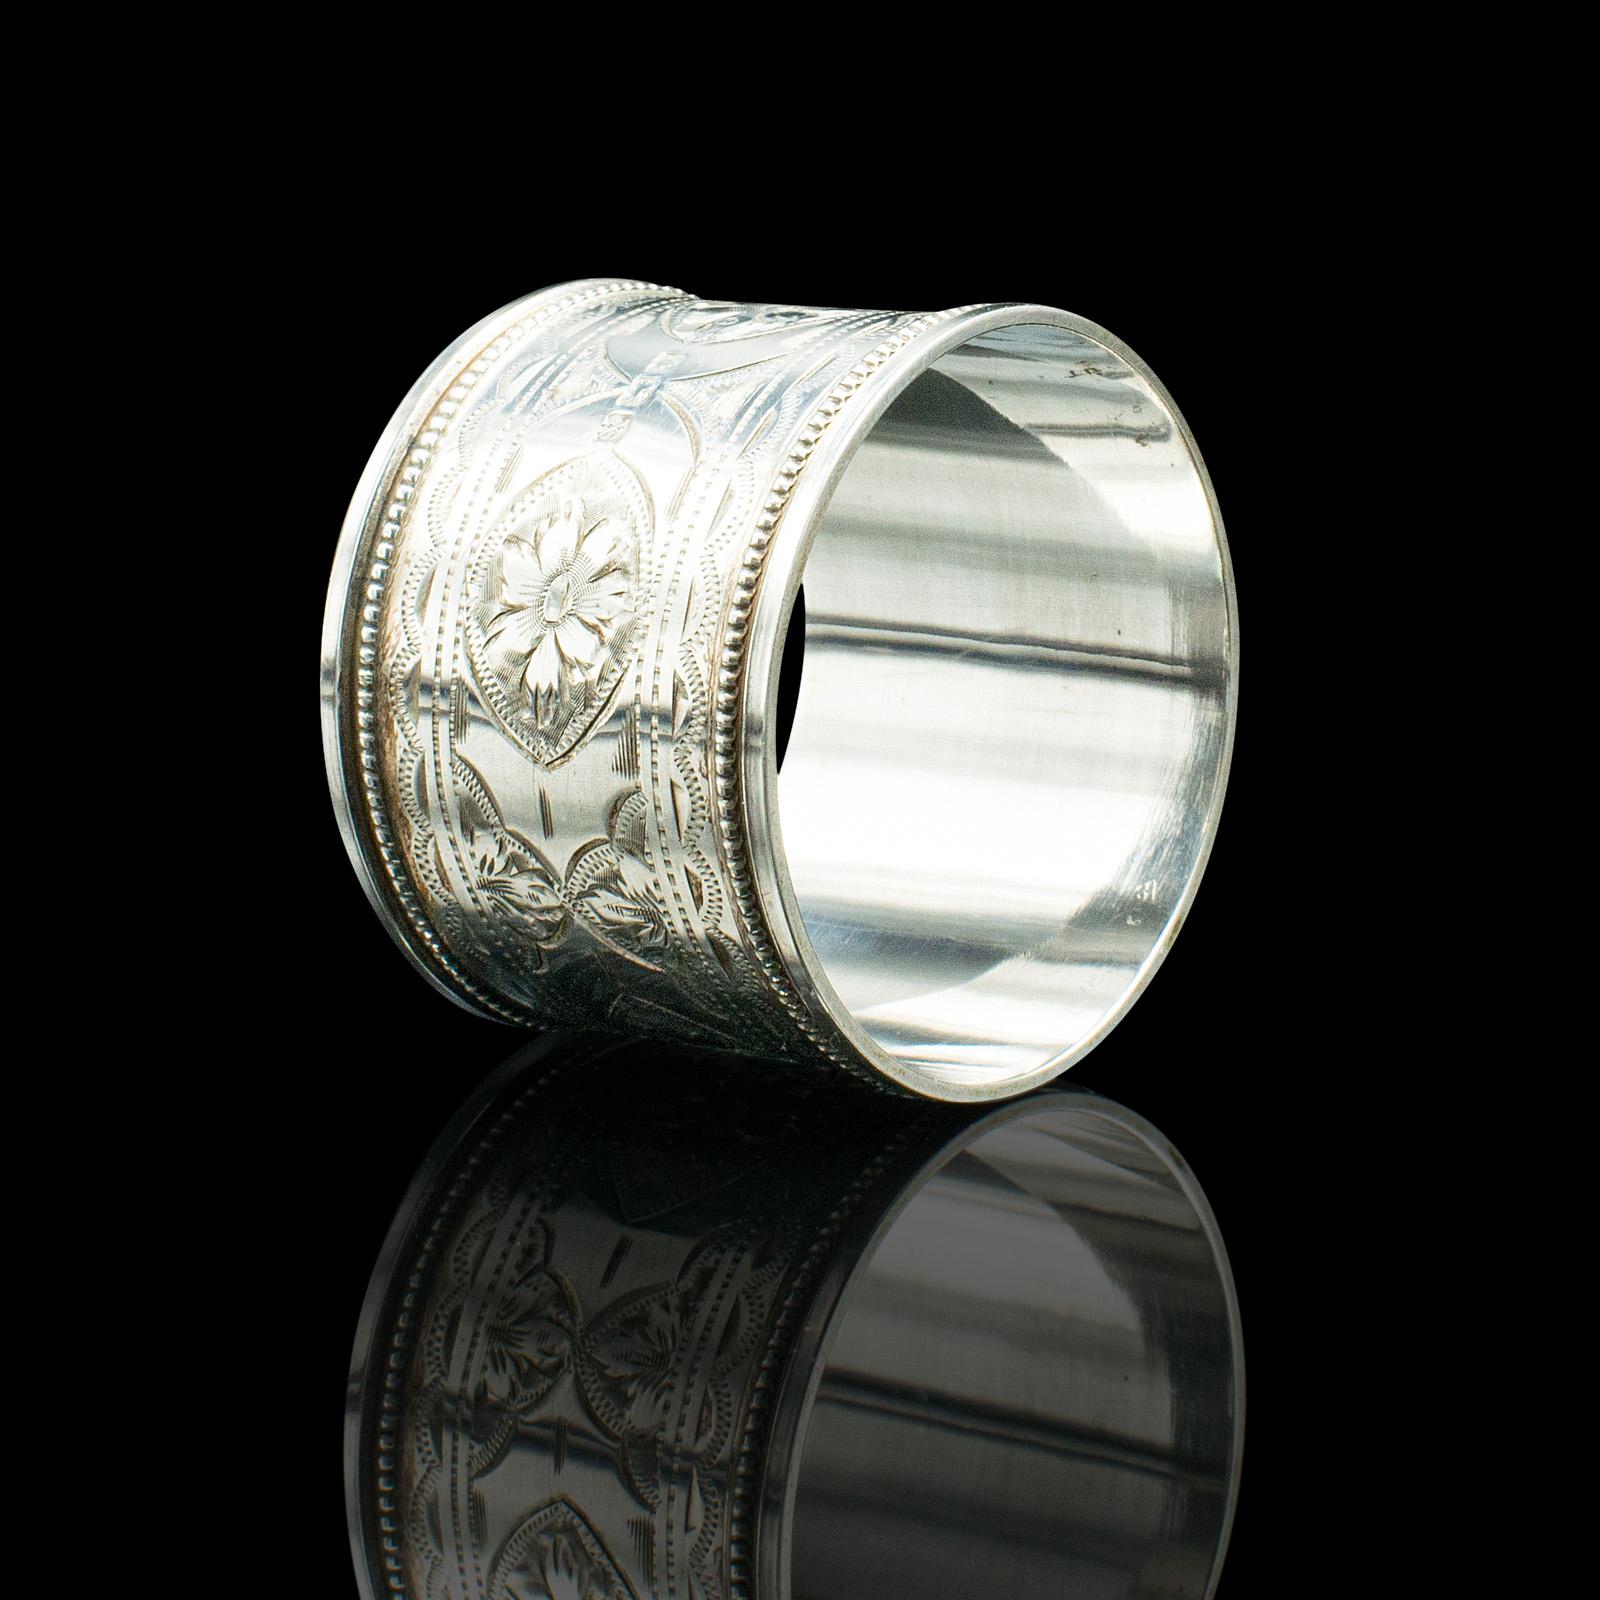 20th Century Antique Napkin Ring, English Sterling Silver, Table Decor, Hallmarked, Date 1922 For Sale